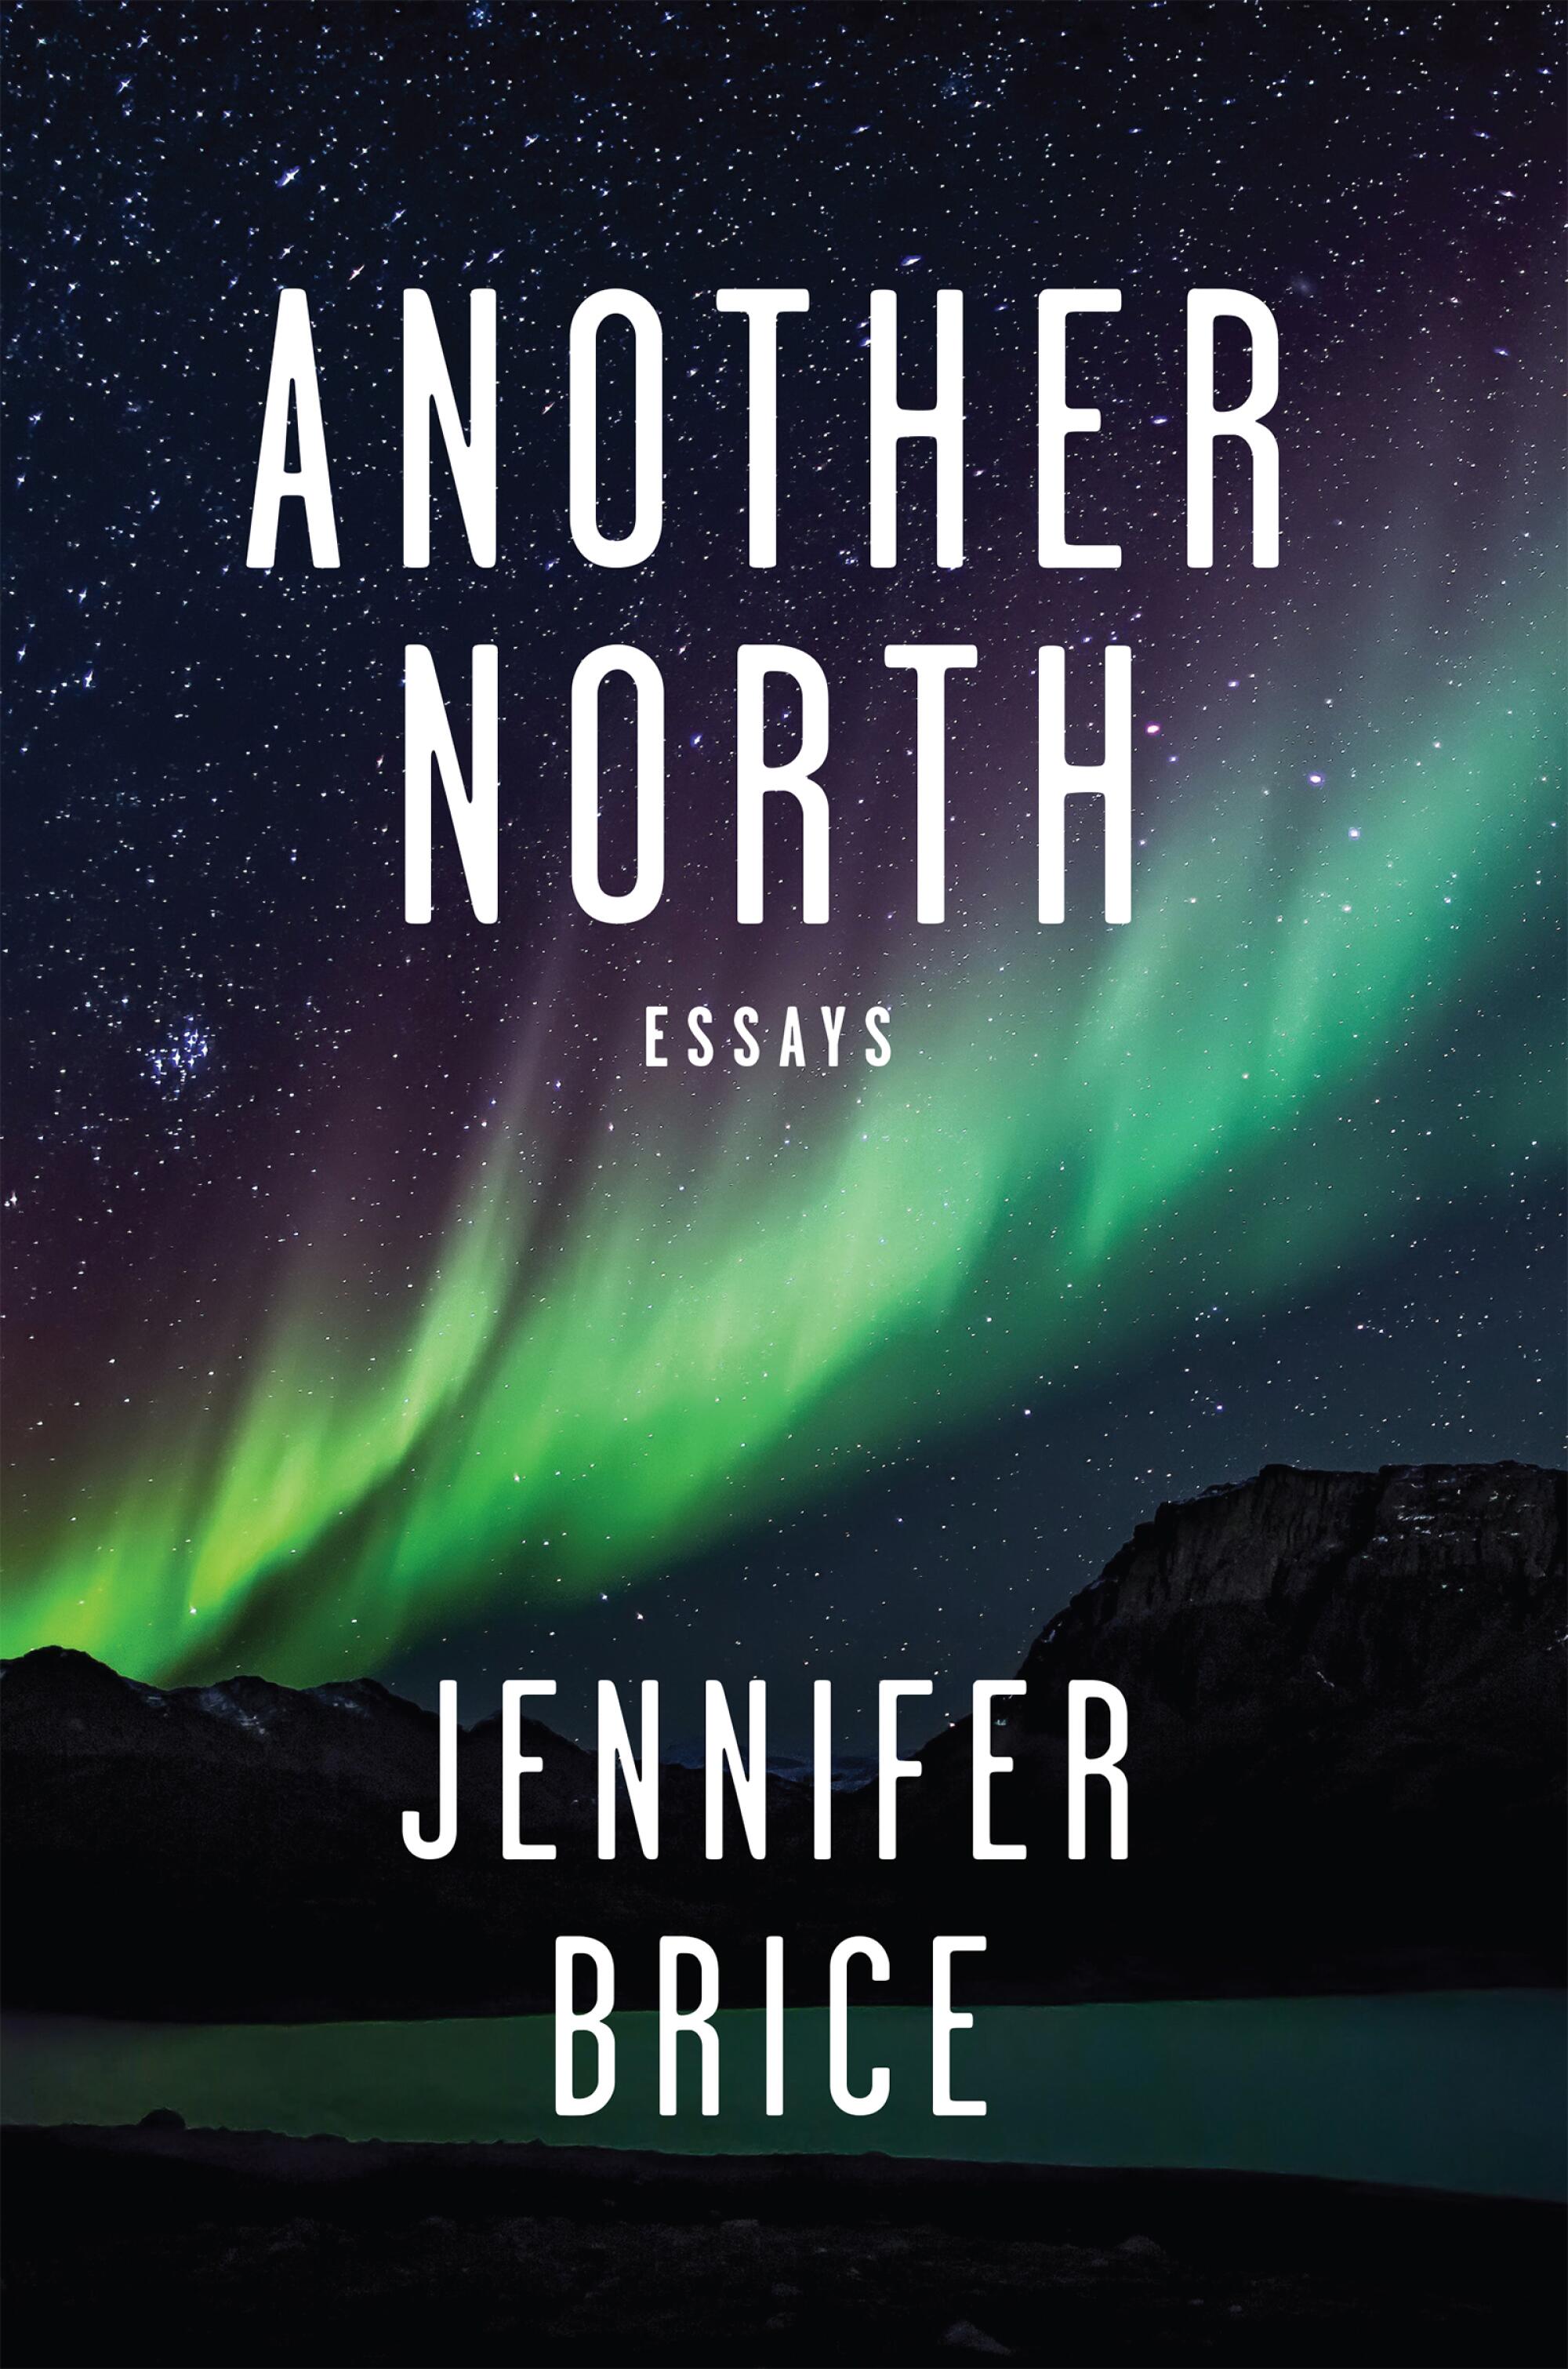 "Another North" by Jennifer Brice